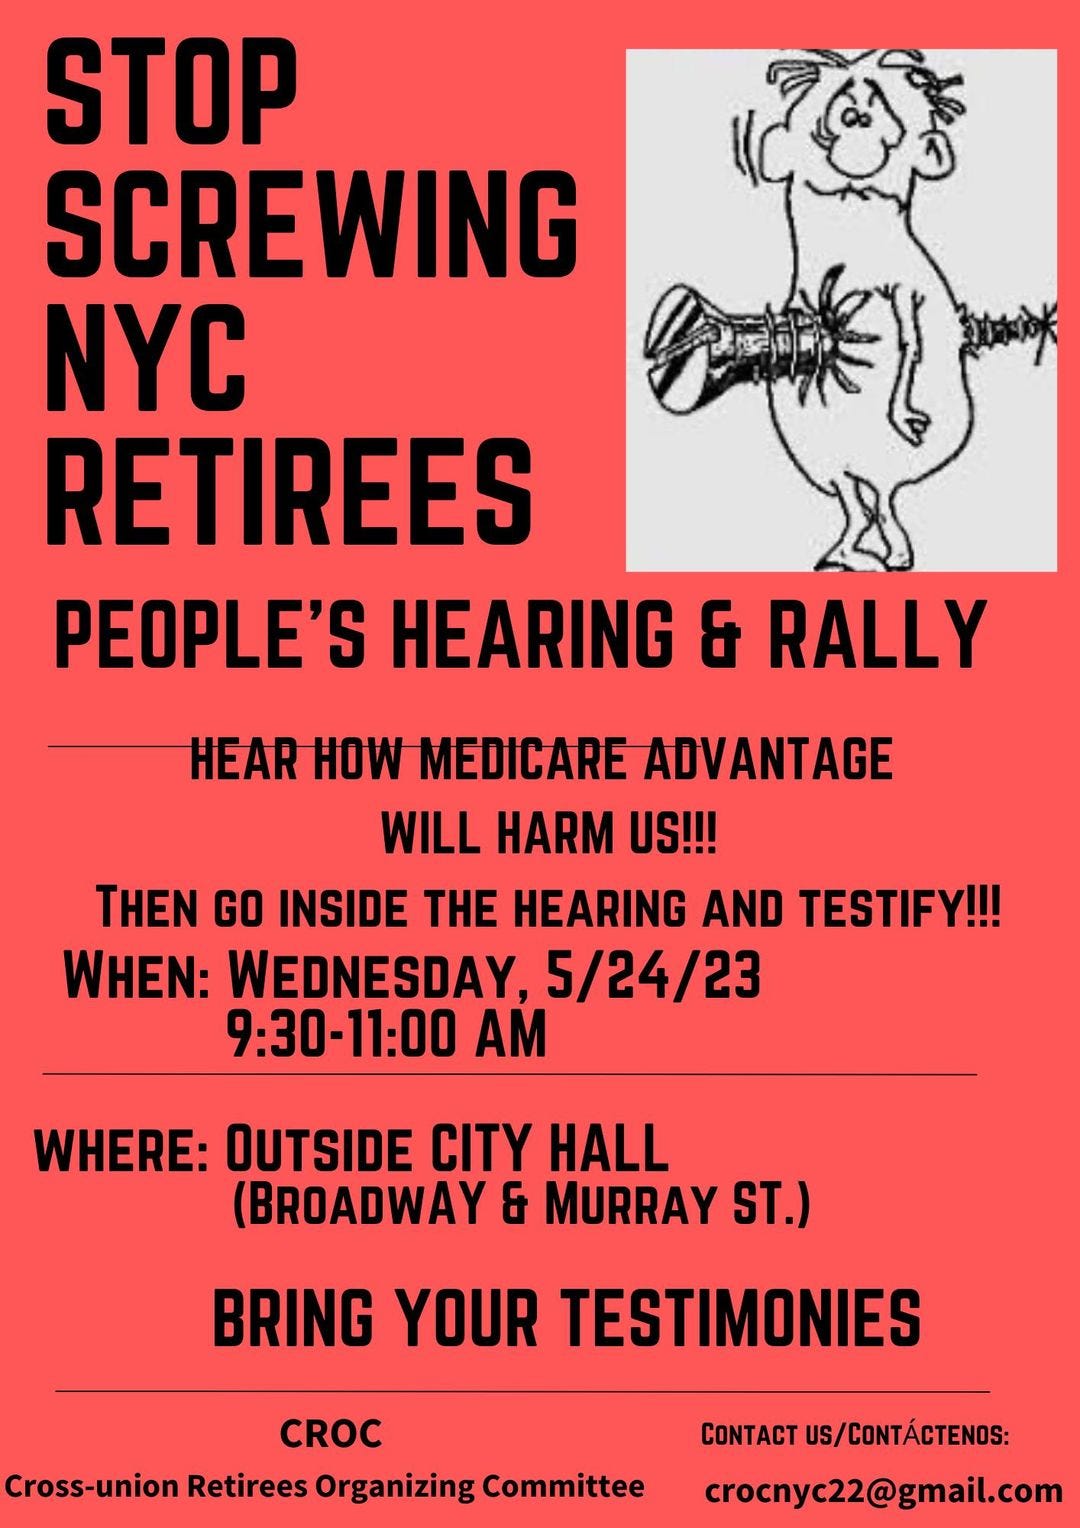 May be an image of text that says 'STOP SCREWING NYC RETIREES PEOPLE'S HEARING & RALLY HEAR HOW MEDICARE ADVANTAGE WILL HARM US!!! THEN GO INSIDE THE HEARING AND TESTIFY!!! WHEN: WEDNESDAY. 5/24/23 9:30-11:00 AM WHERE: OUTSIDE CITY HALL (BROADWAY & MURRAY ST.) BRING YOUR TESTIMONIES CROC Cross-union Retirees Organizing Committee CONTACT US/CONTÁCTENOS: crocnyc22@gmail.com'